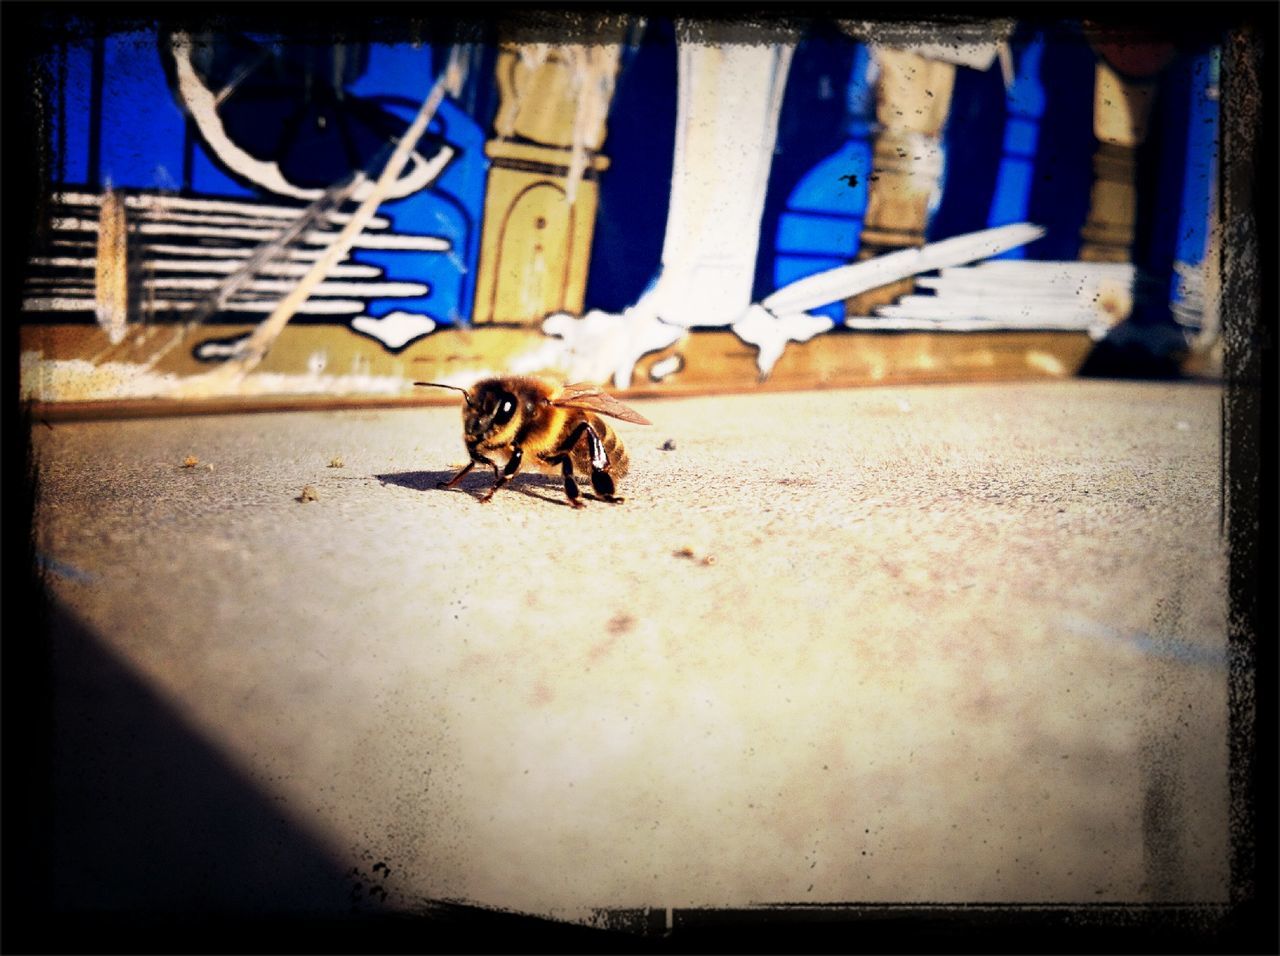 transfer print, animal themes, one animal, auto post production filter, wildlife, animals in the wild, insect, built structure, architecture, building exterior, wall - building feature, day, sunlight, selective focus, outdoors, no people, full length, shadow, close-up, wall